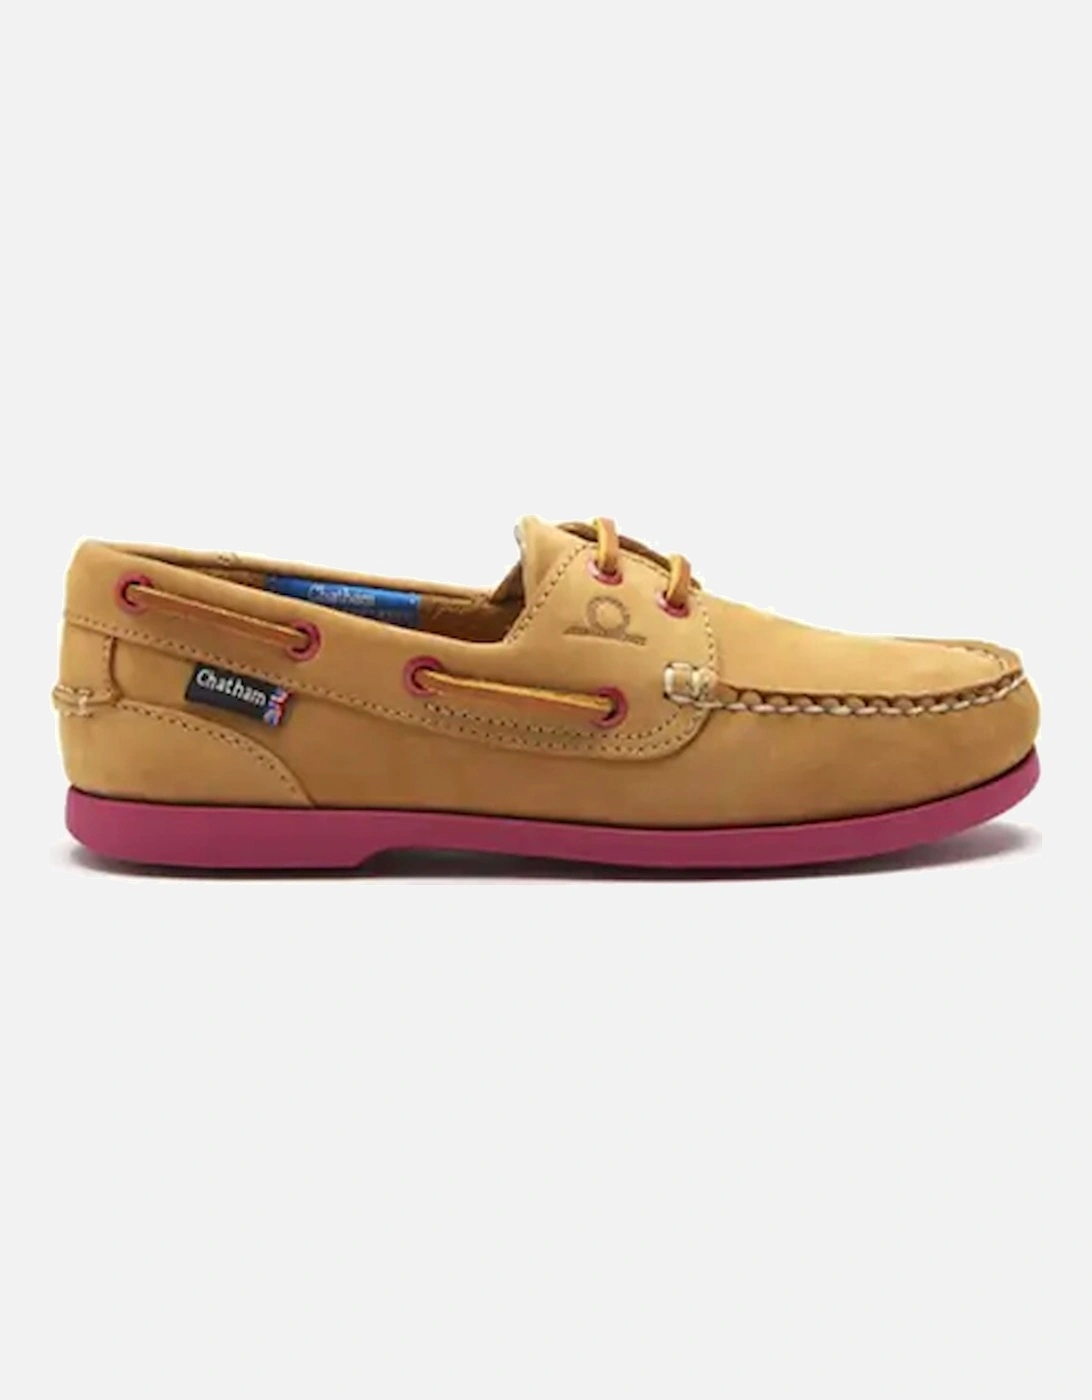 Women's Pippa II G2 Leather Boat Shoes Tan/Pink, 7 of 6